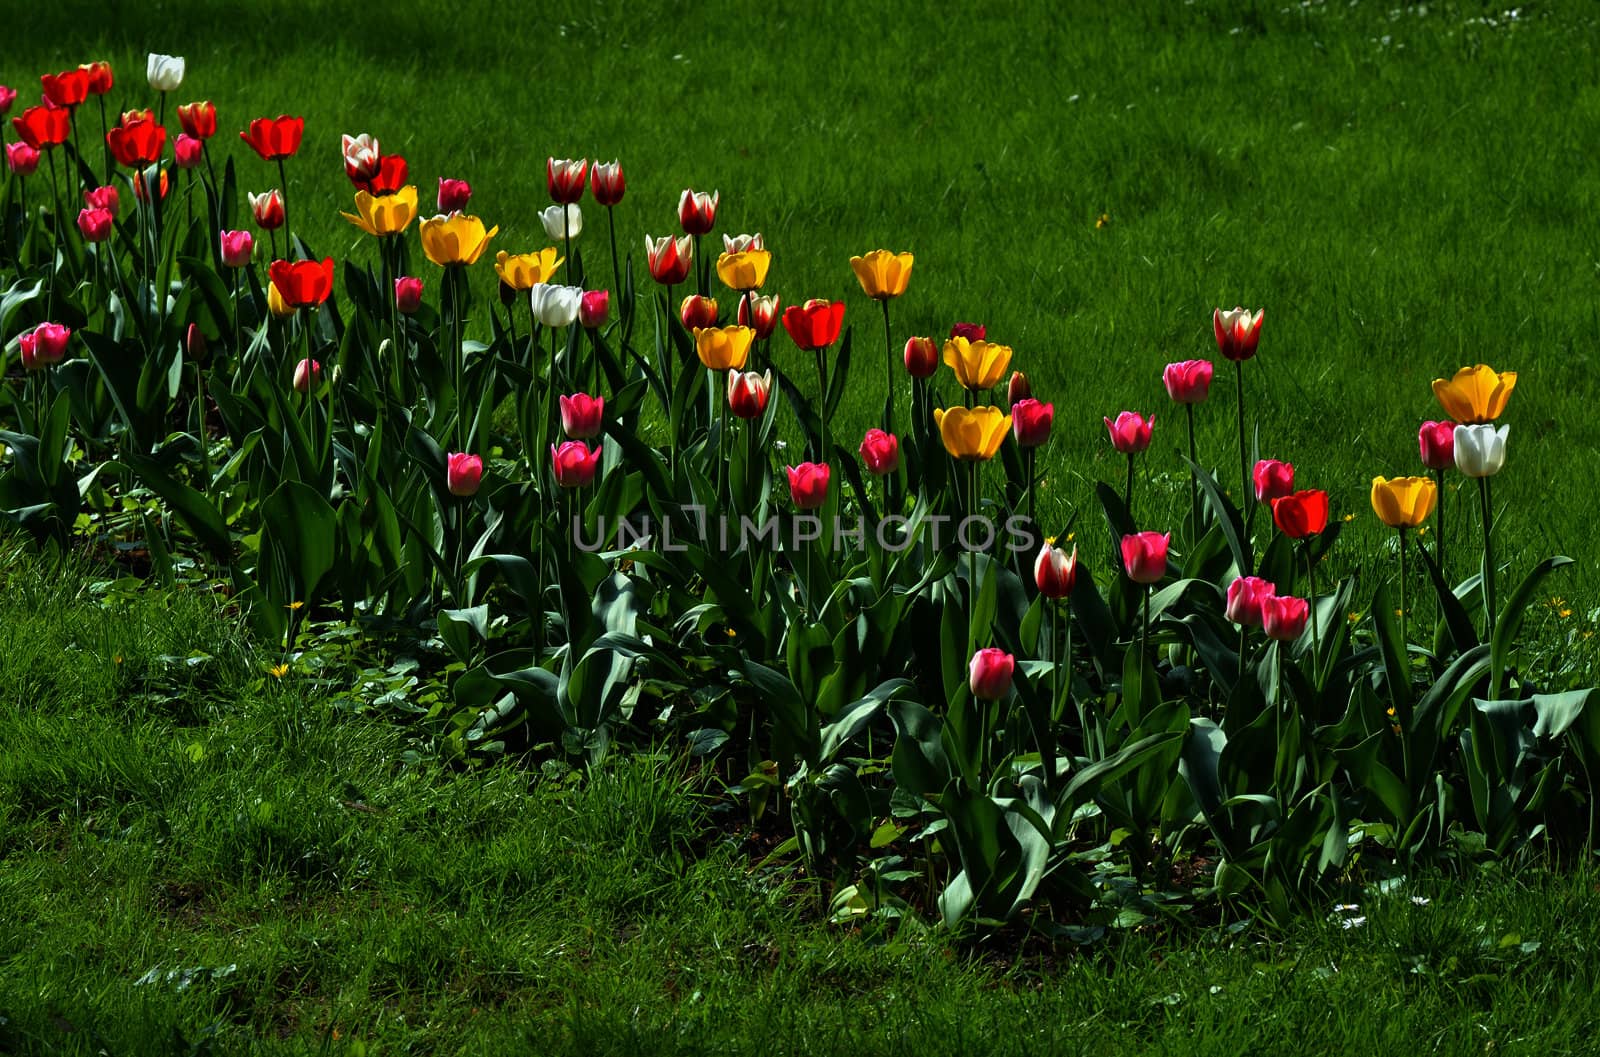 A lot of blooming tulips in the park